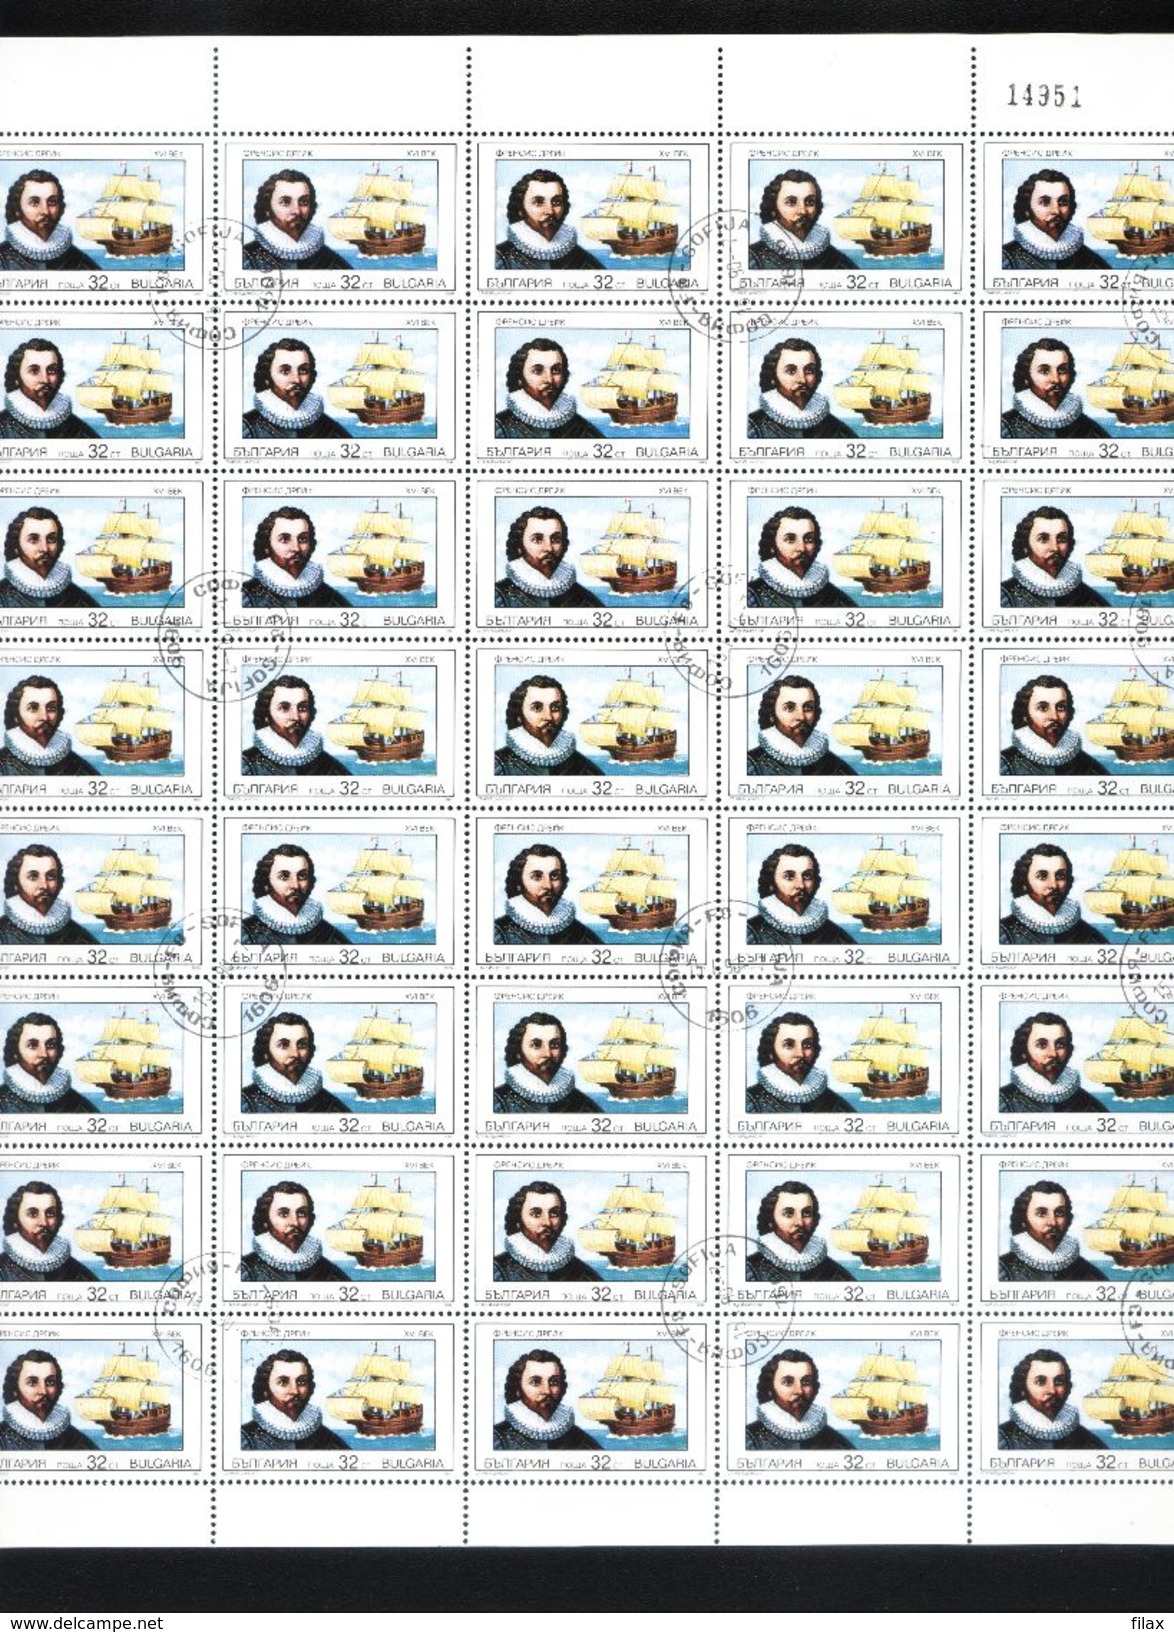 LOT BGCTO03 - CHEAP CTO STAMPS IN SHEETS (for packets or resale)